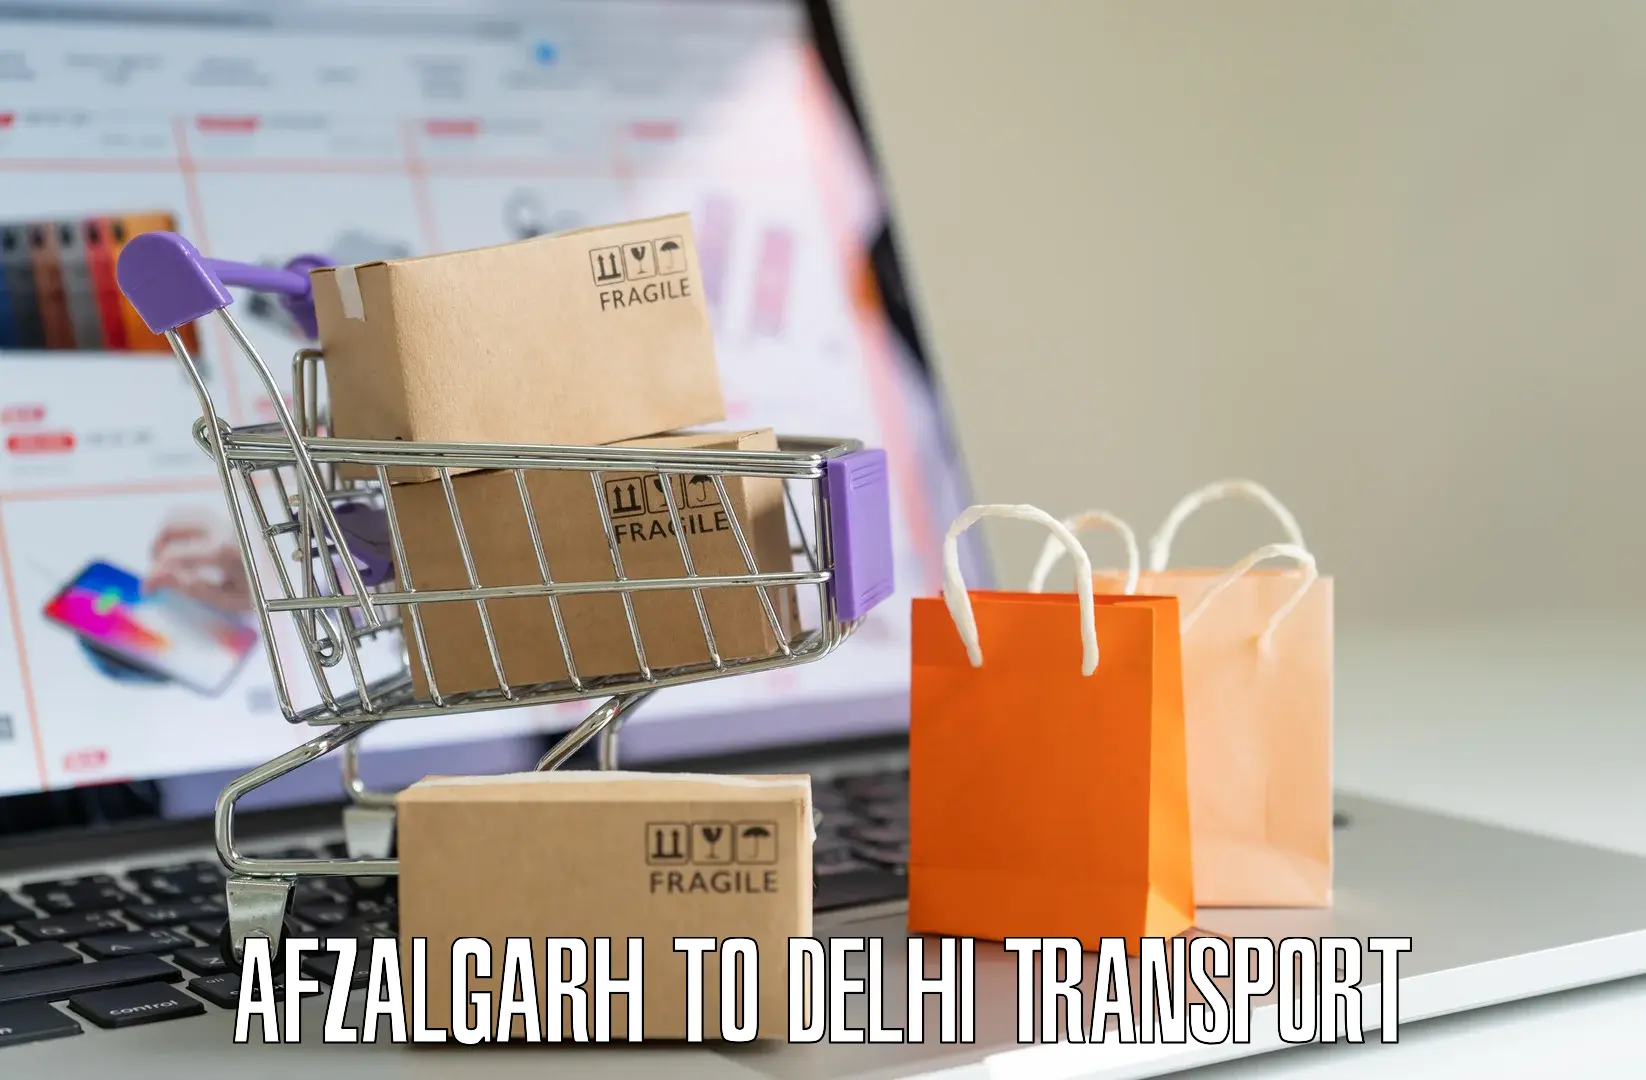 Container transportation services Afzalgarh to NCR